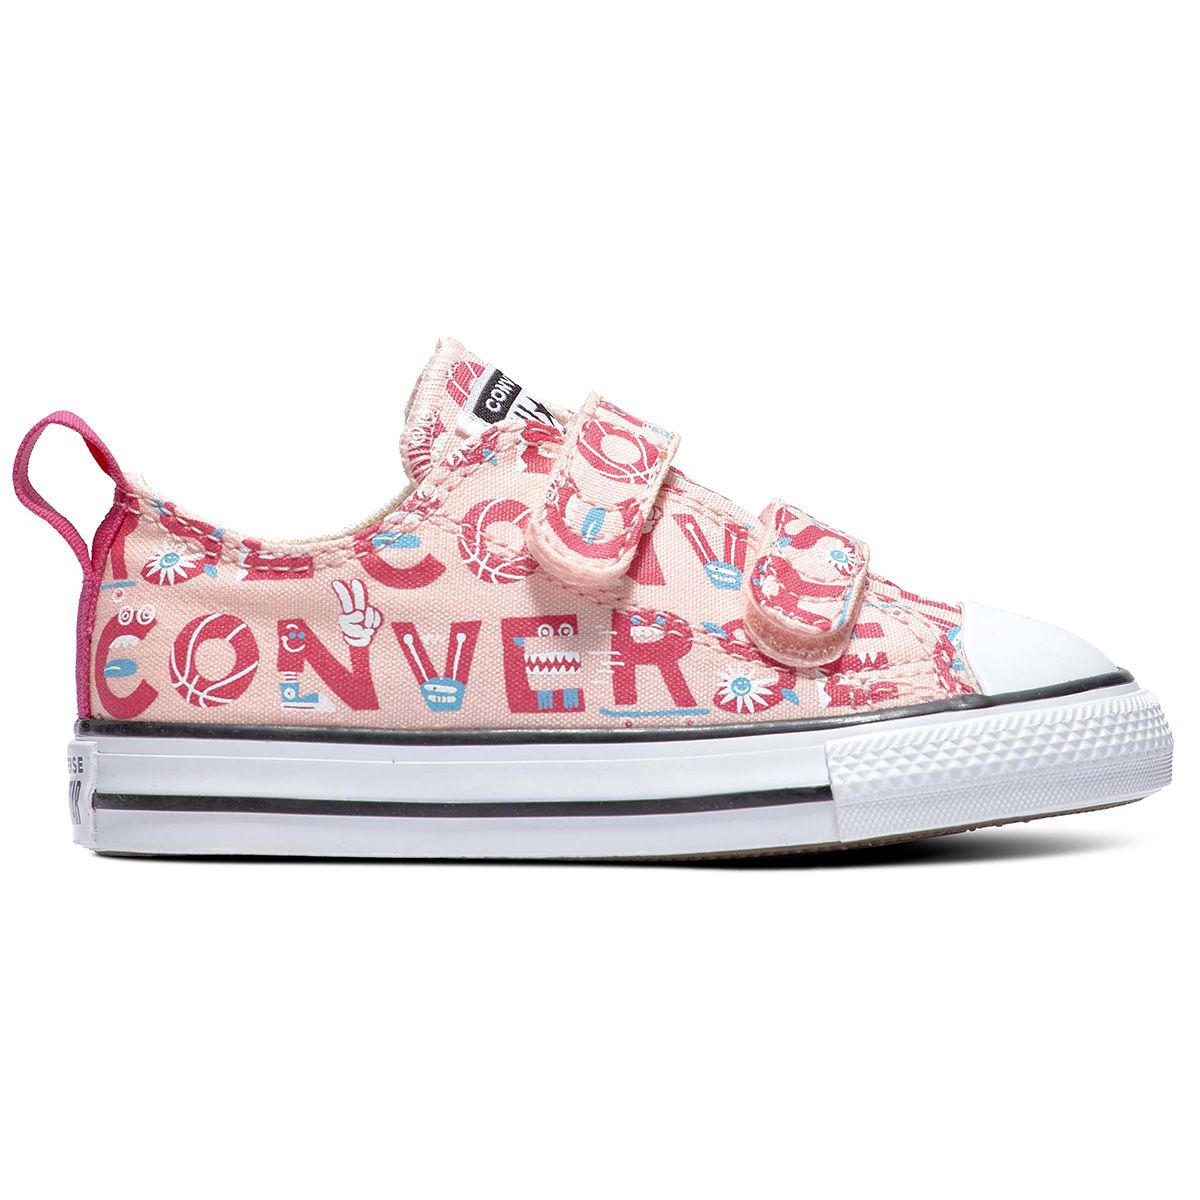 Converse Chuck Taylor All Star 2V Creature Feature Kid's Sho